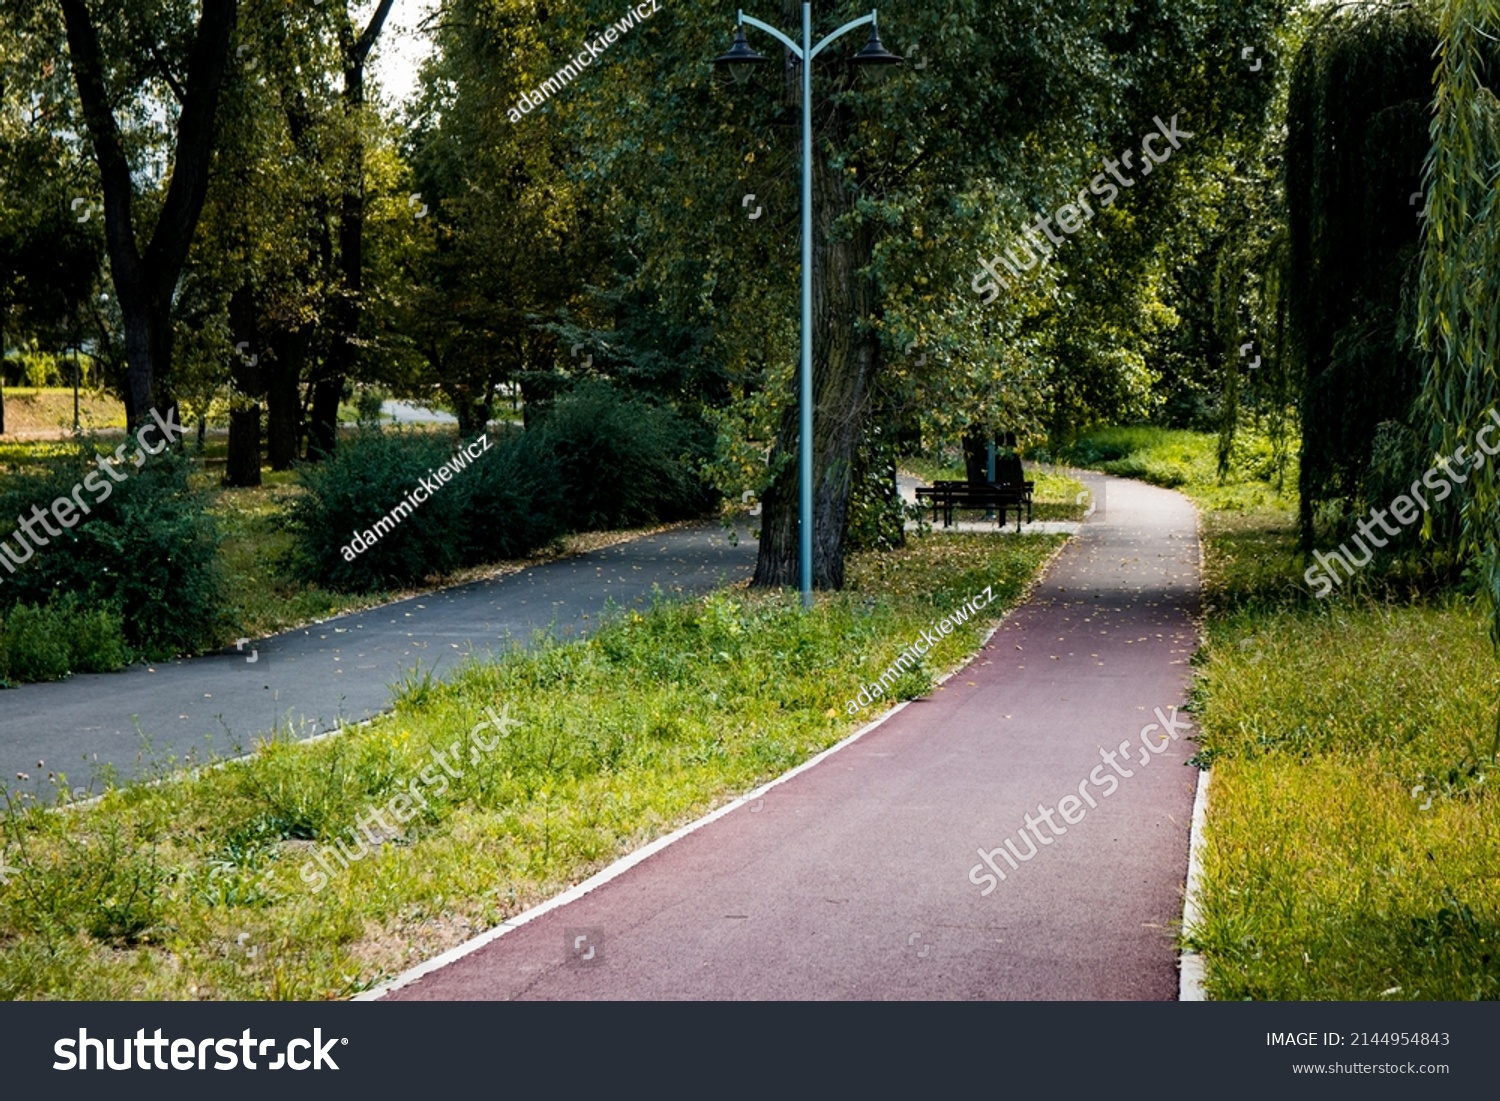 Asphalt footpath and bicycle path surrounded by lawn and trees at the city park #2144954843